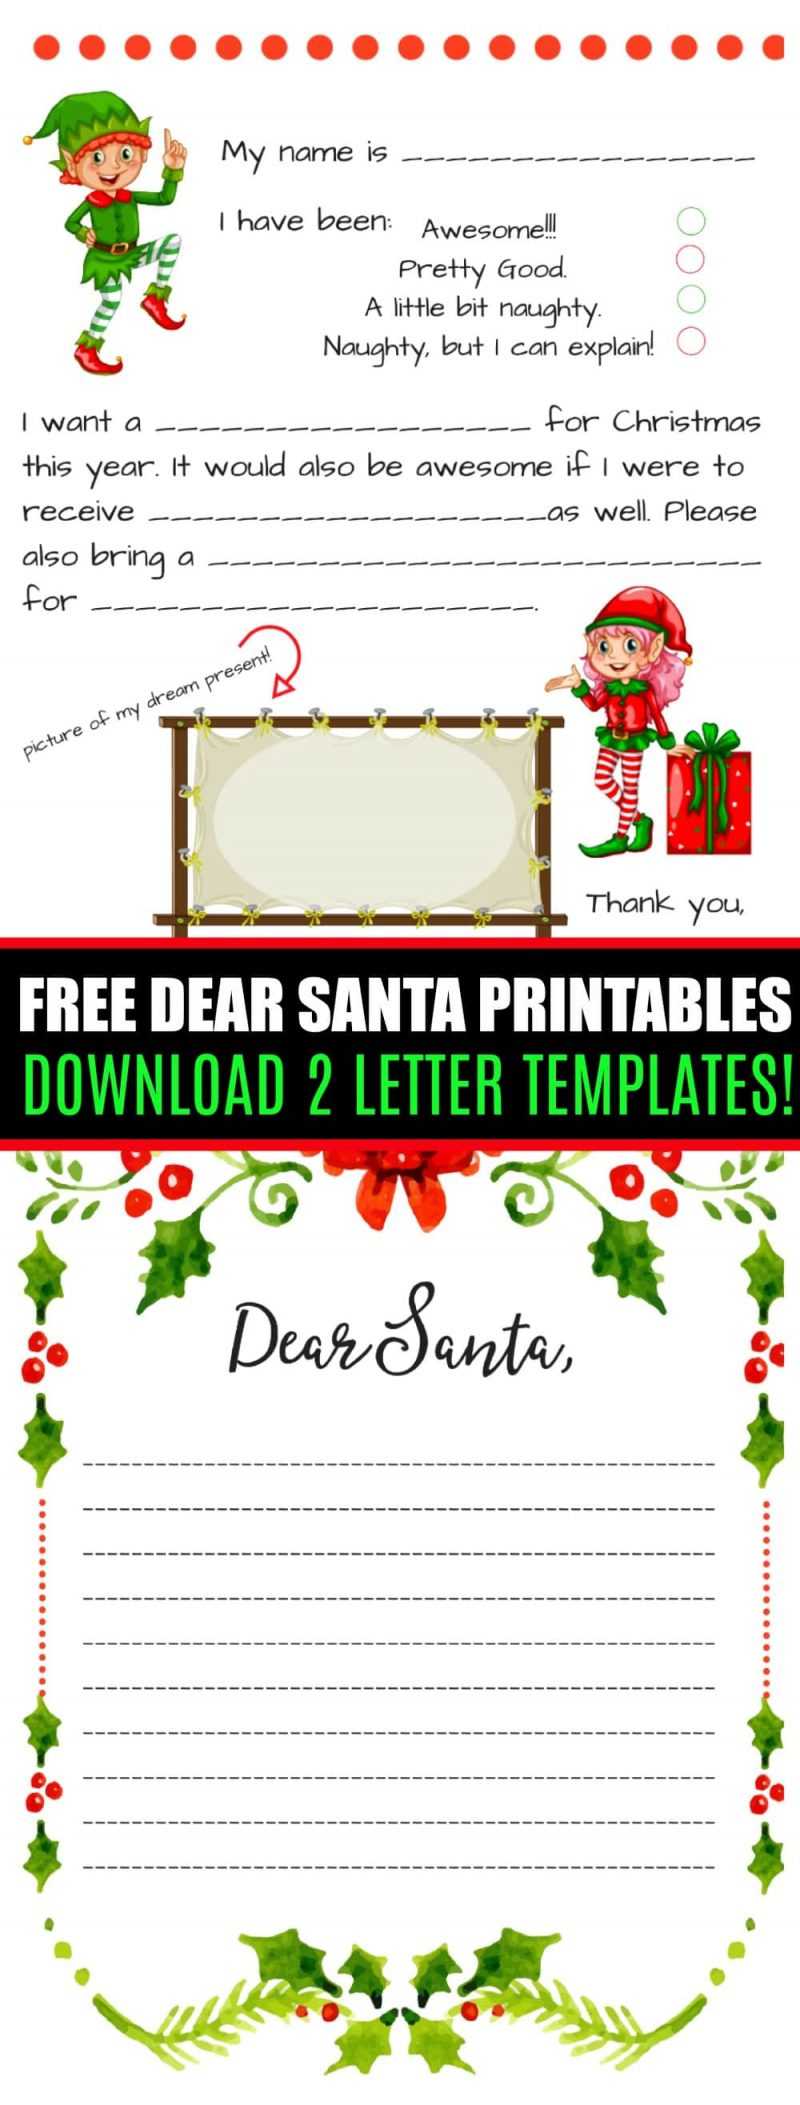 Dear Santa Fill In Letter Template – With Blank Letter From Santa Template